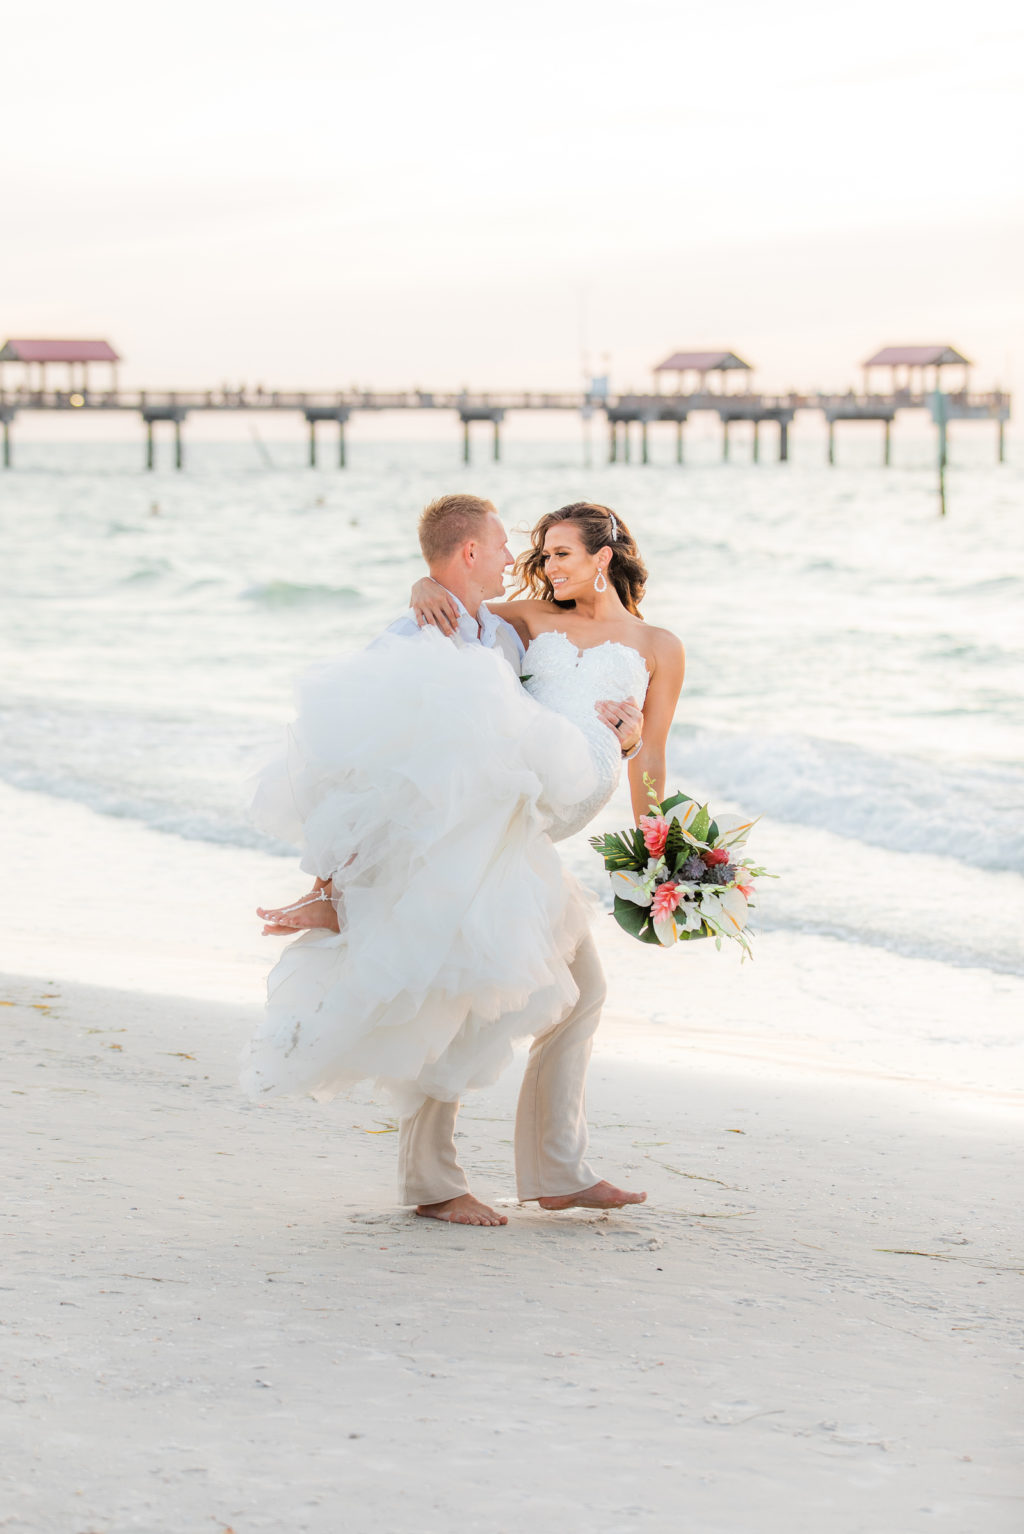 Romantic Groom Carrying Bride on Sandy Beach During Sunset | Wedding Venue Hilton Clearwater Beach